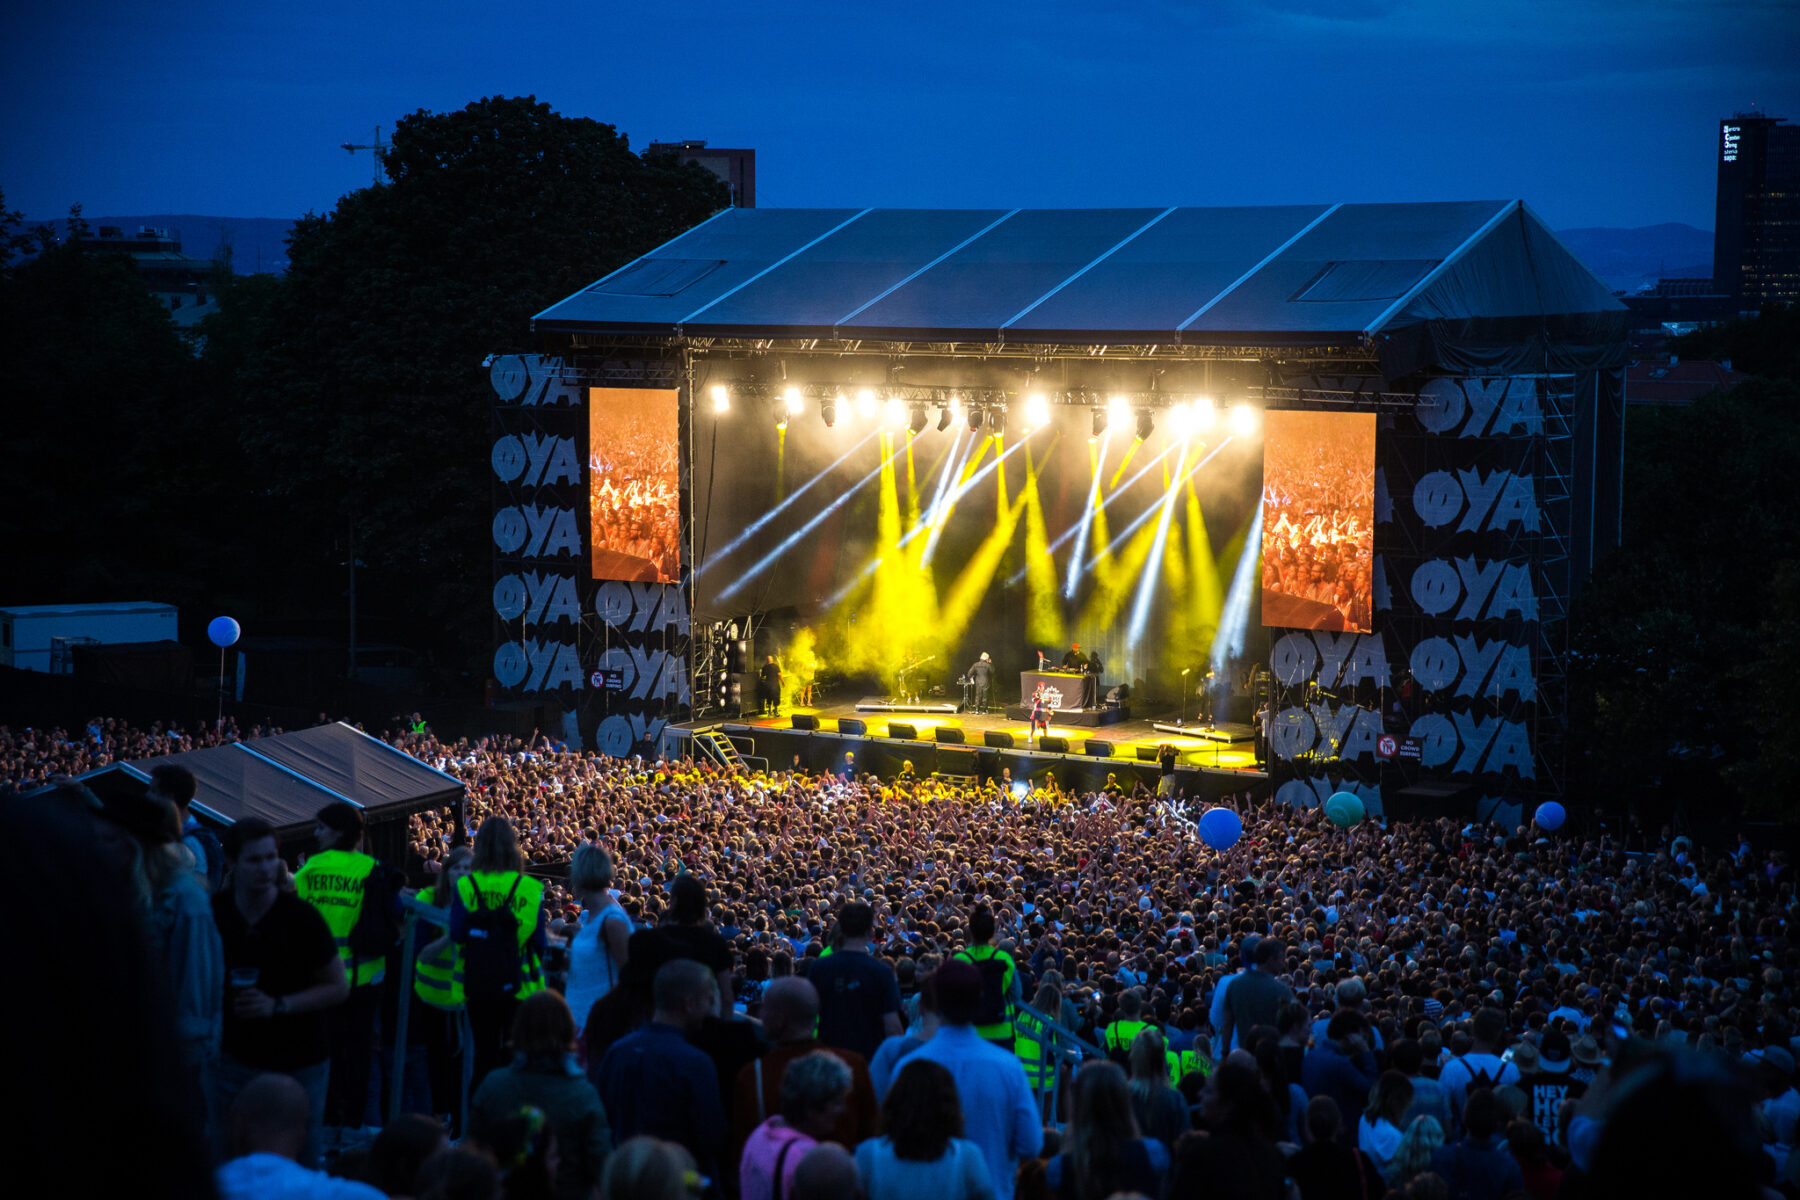 The main stage at the Øya festival 2014